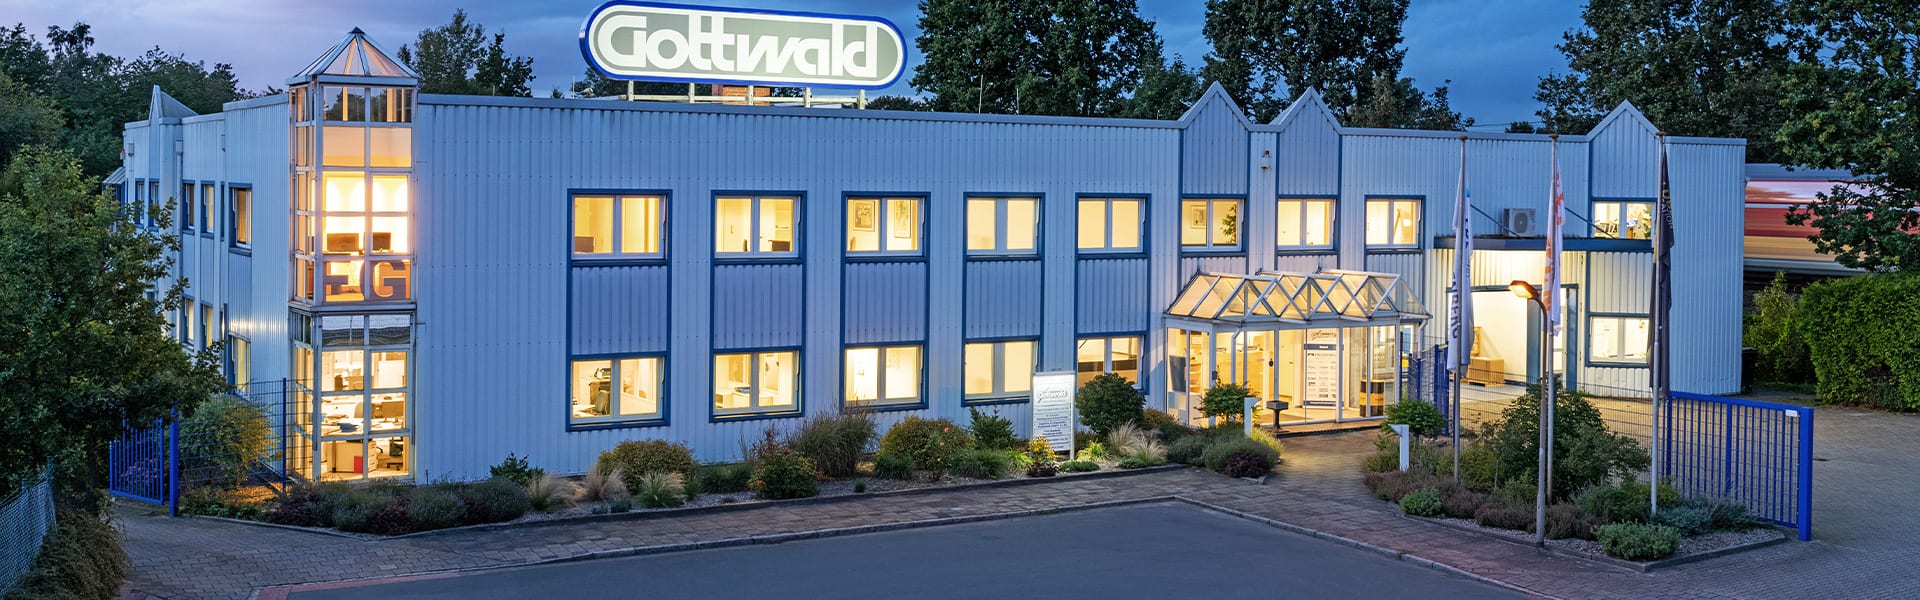 The Gottwald group